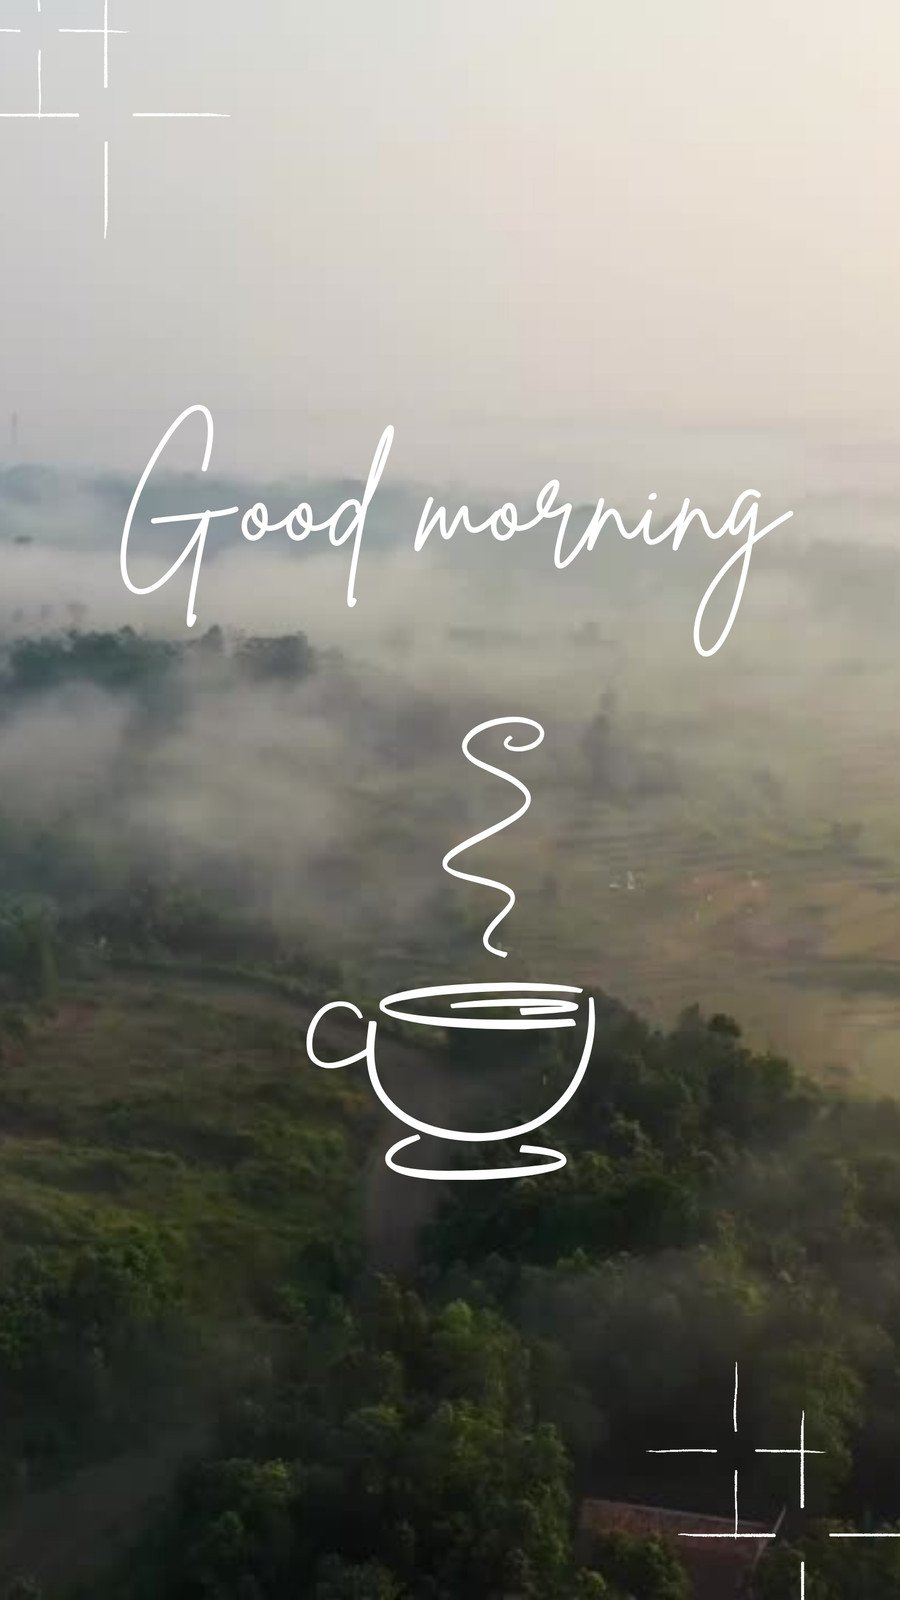 Page 11 - Free and customizable good morning templates